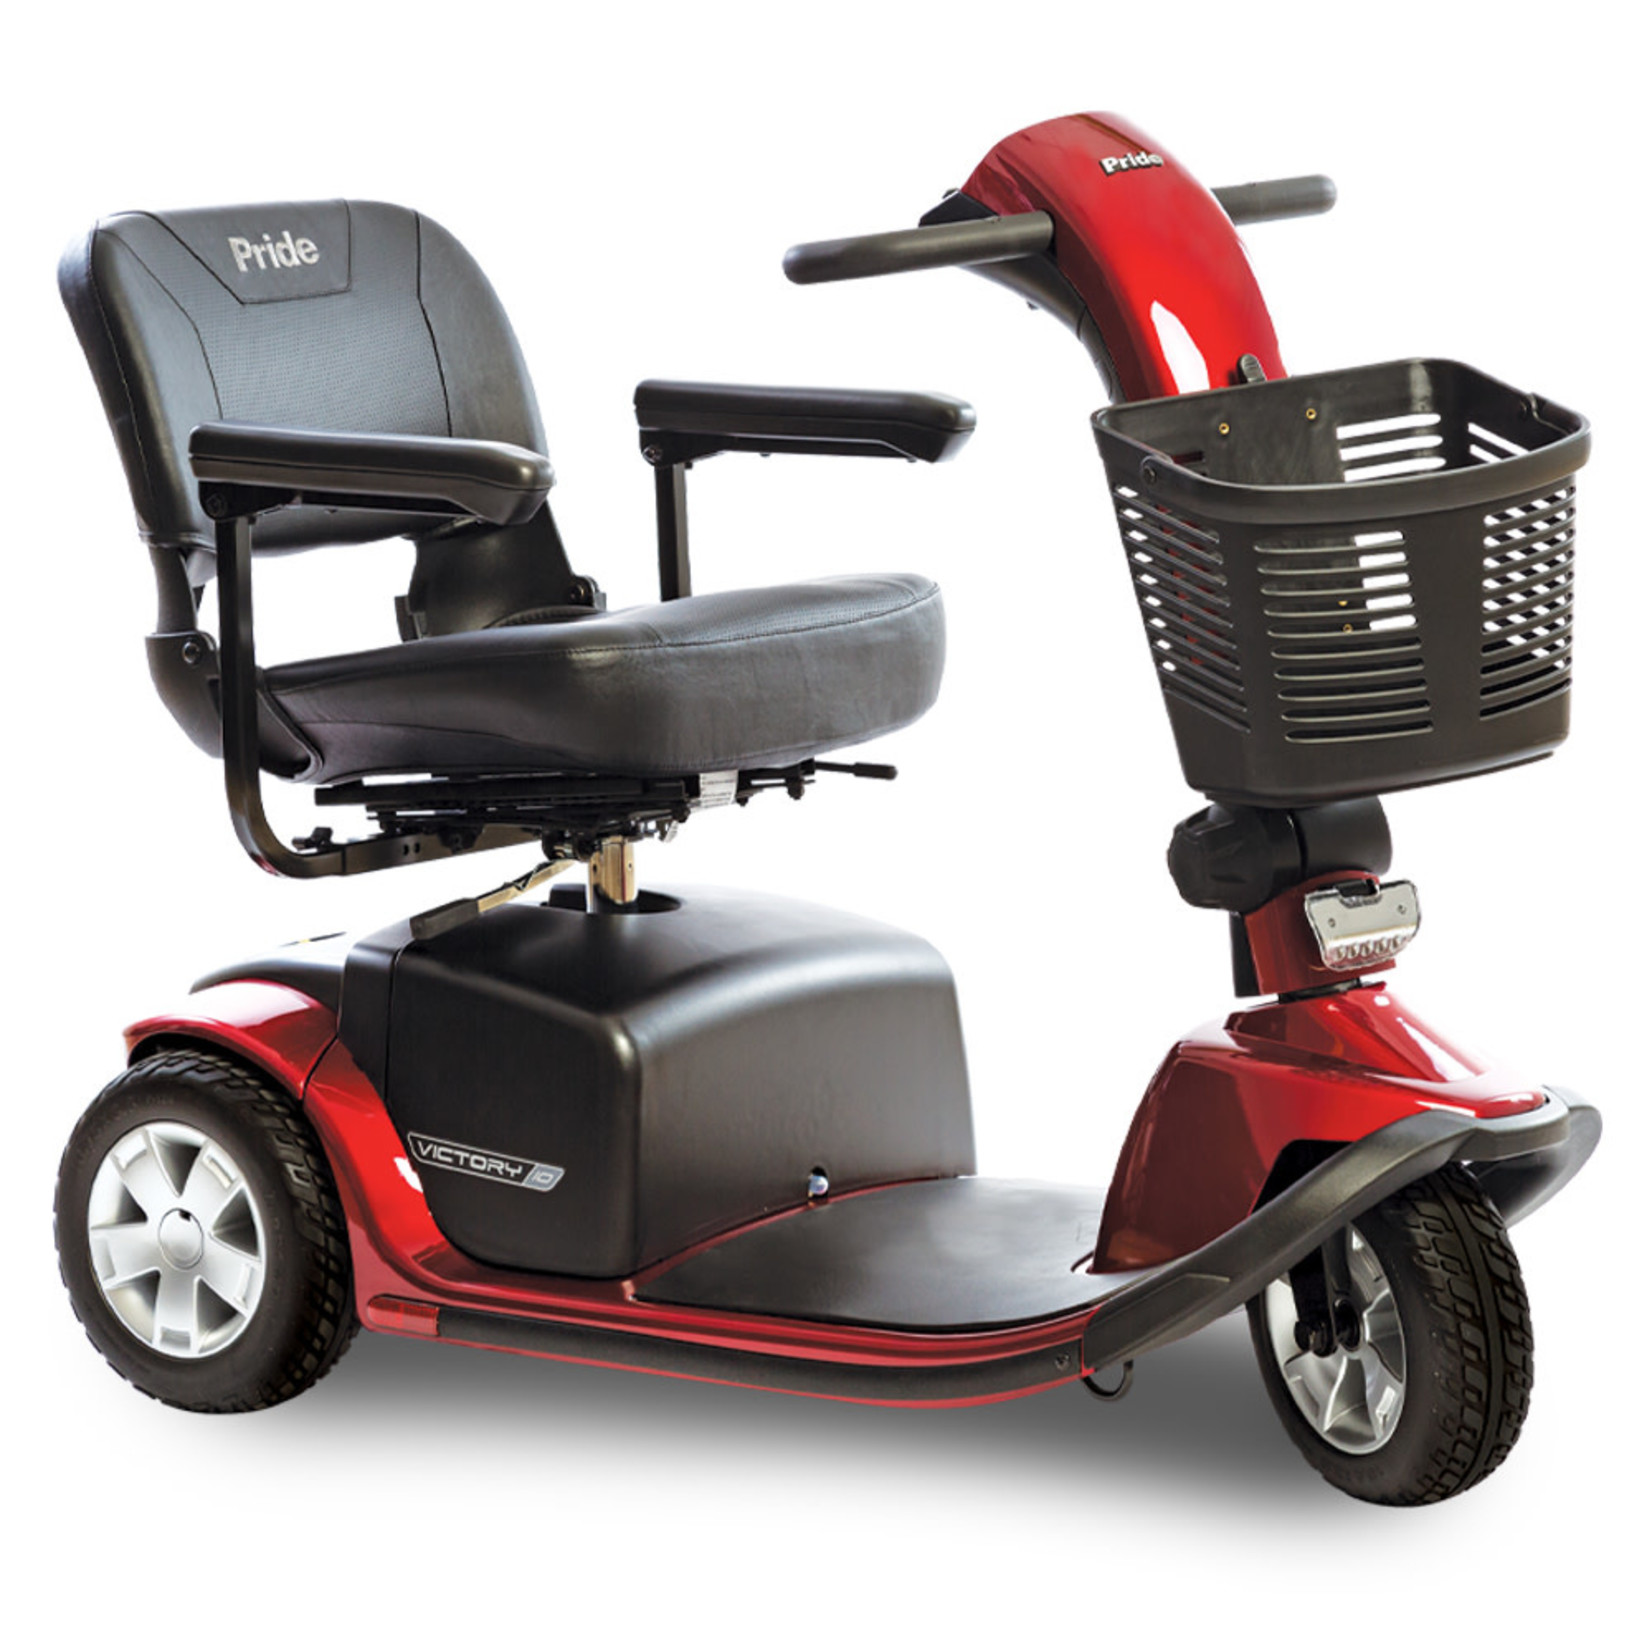 Pride Victory 10 3-wheel Mobility Scooter